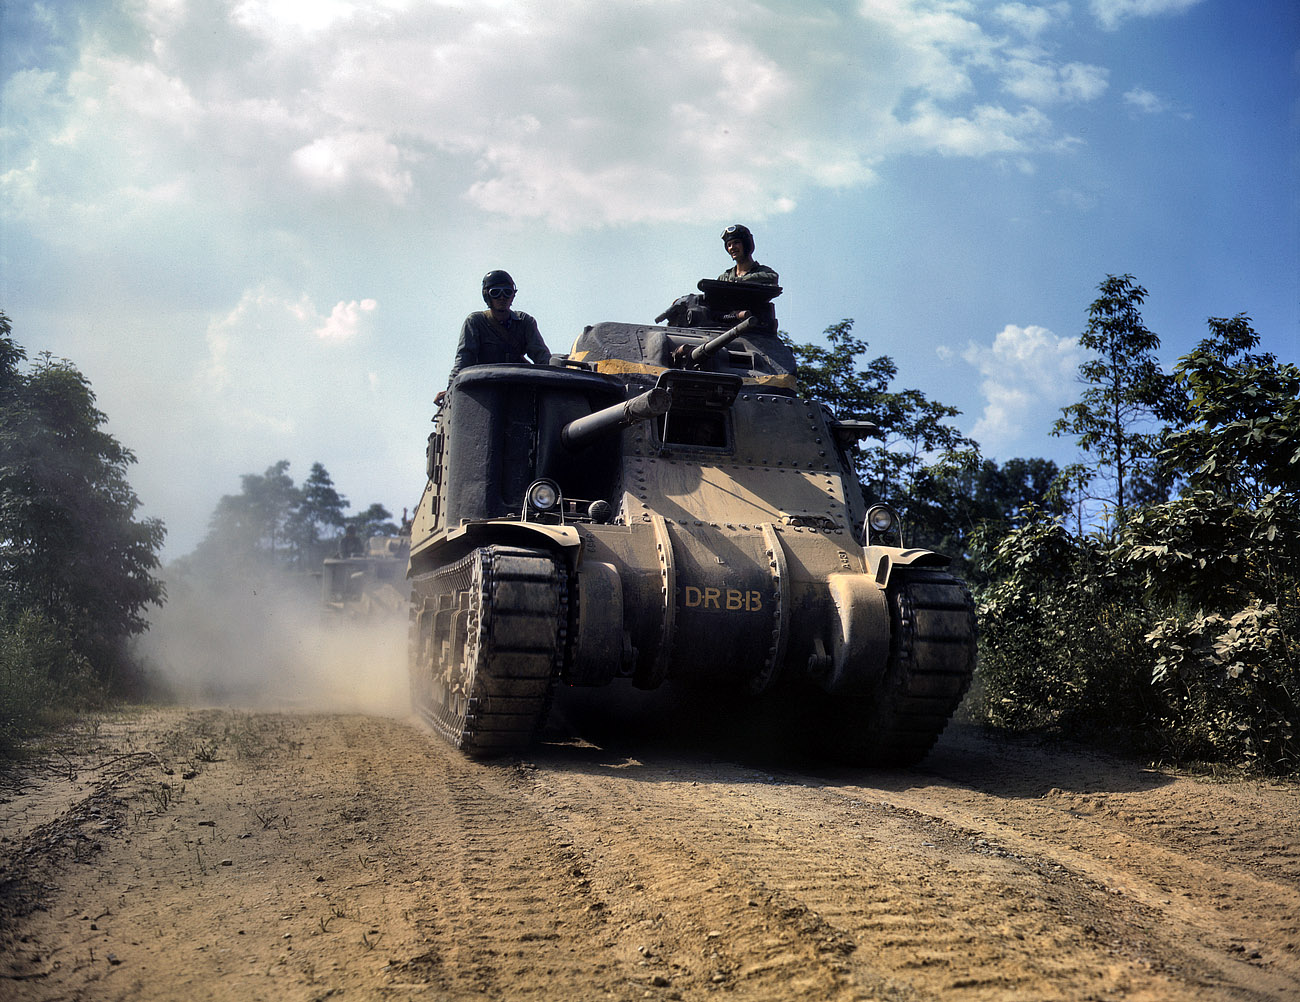 June 1942. "M-3 tanks in action. Fort Knox, Kentucky." View full size. 4x5 Kodachrome transparency by Alfred Palmer for the Office of War Information.